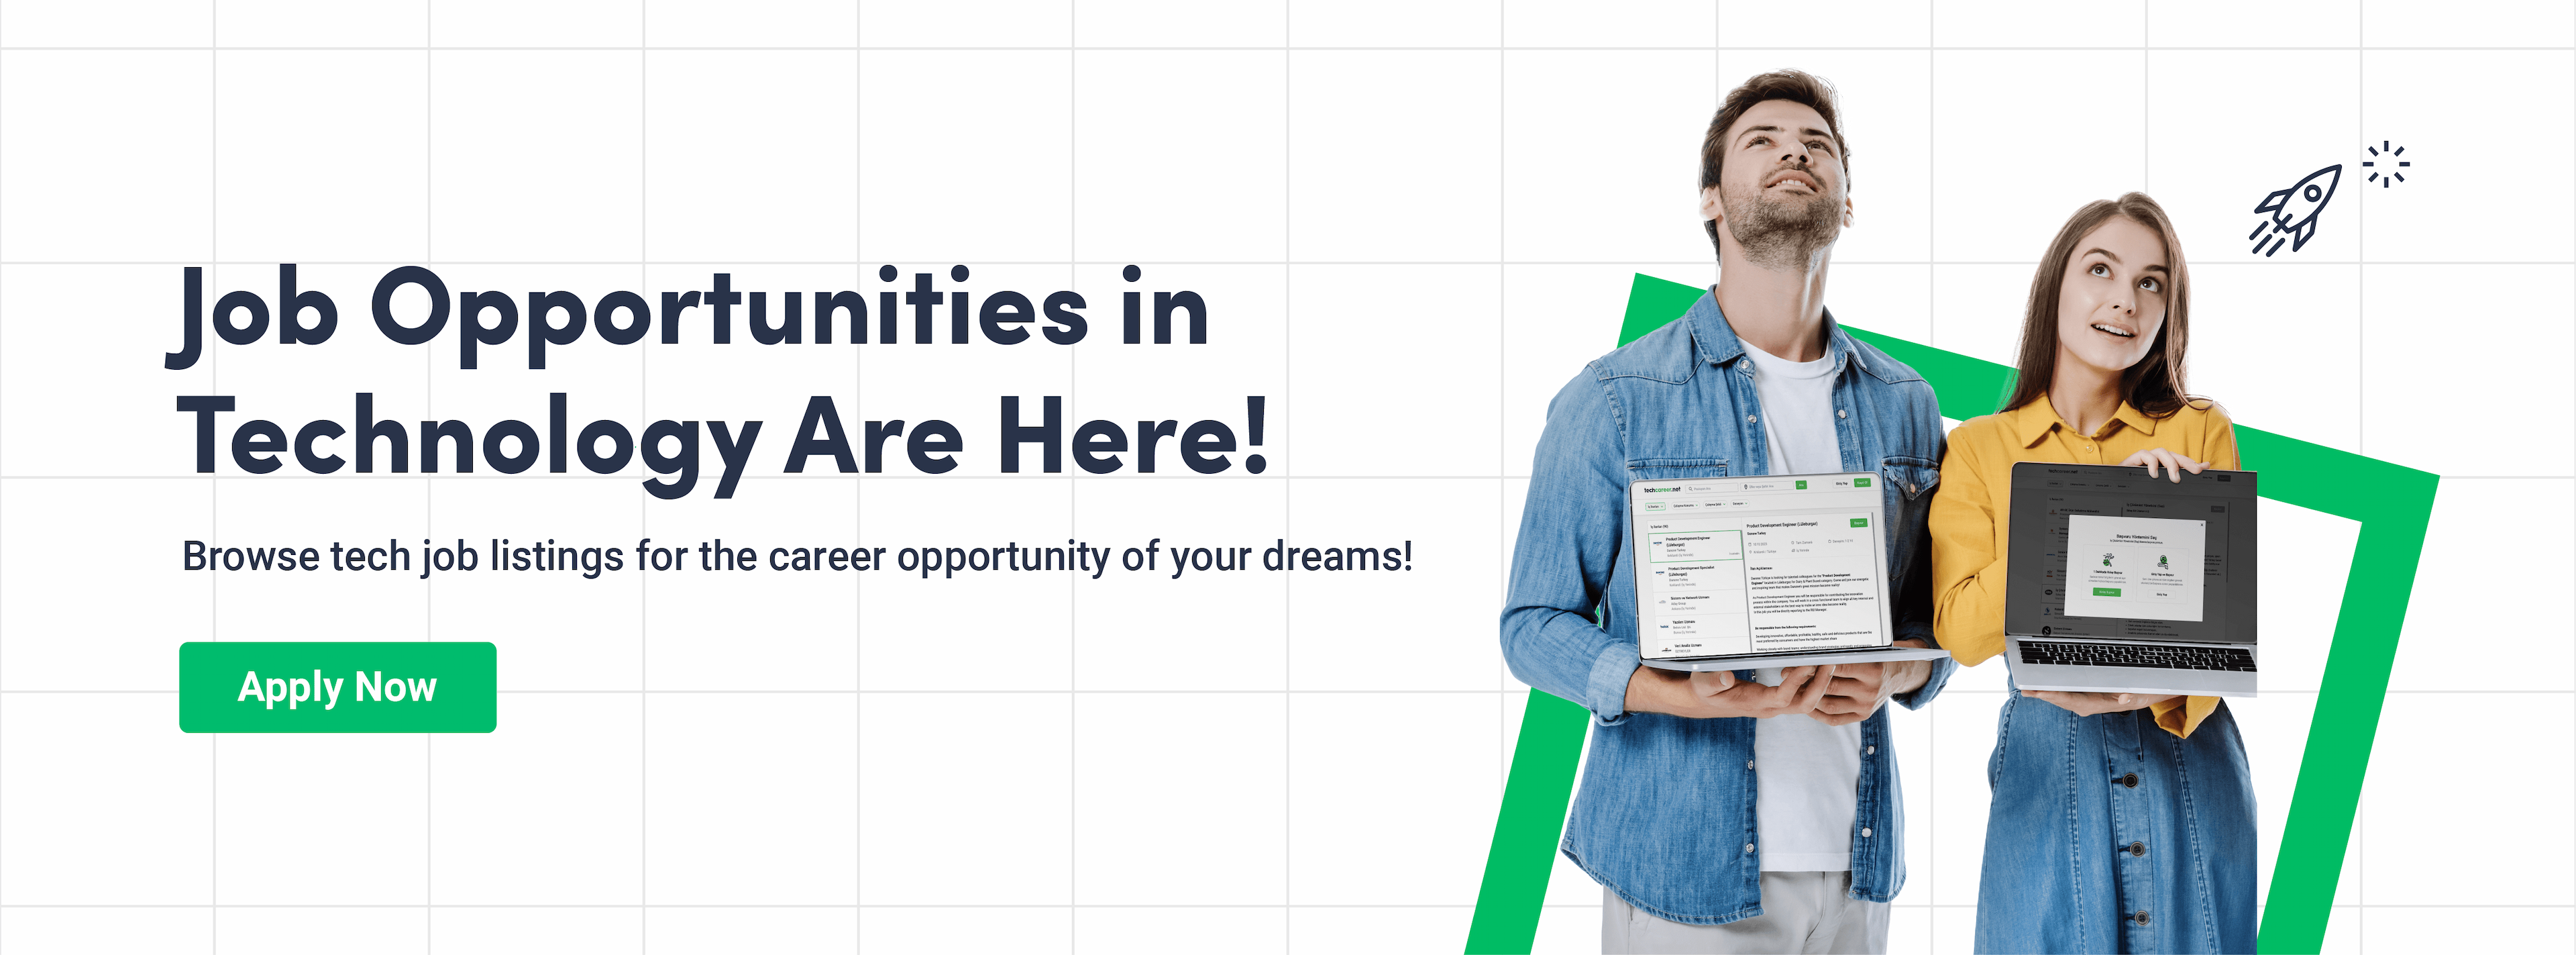 We have gathered the job opportunities of your dreams for you!
Remote work, international opportunities, full-time positions.